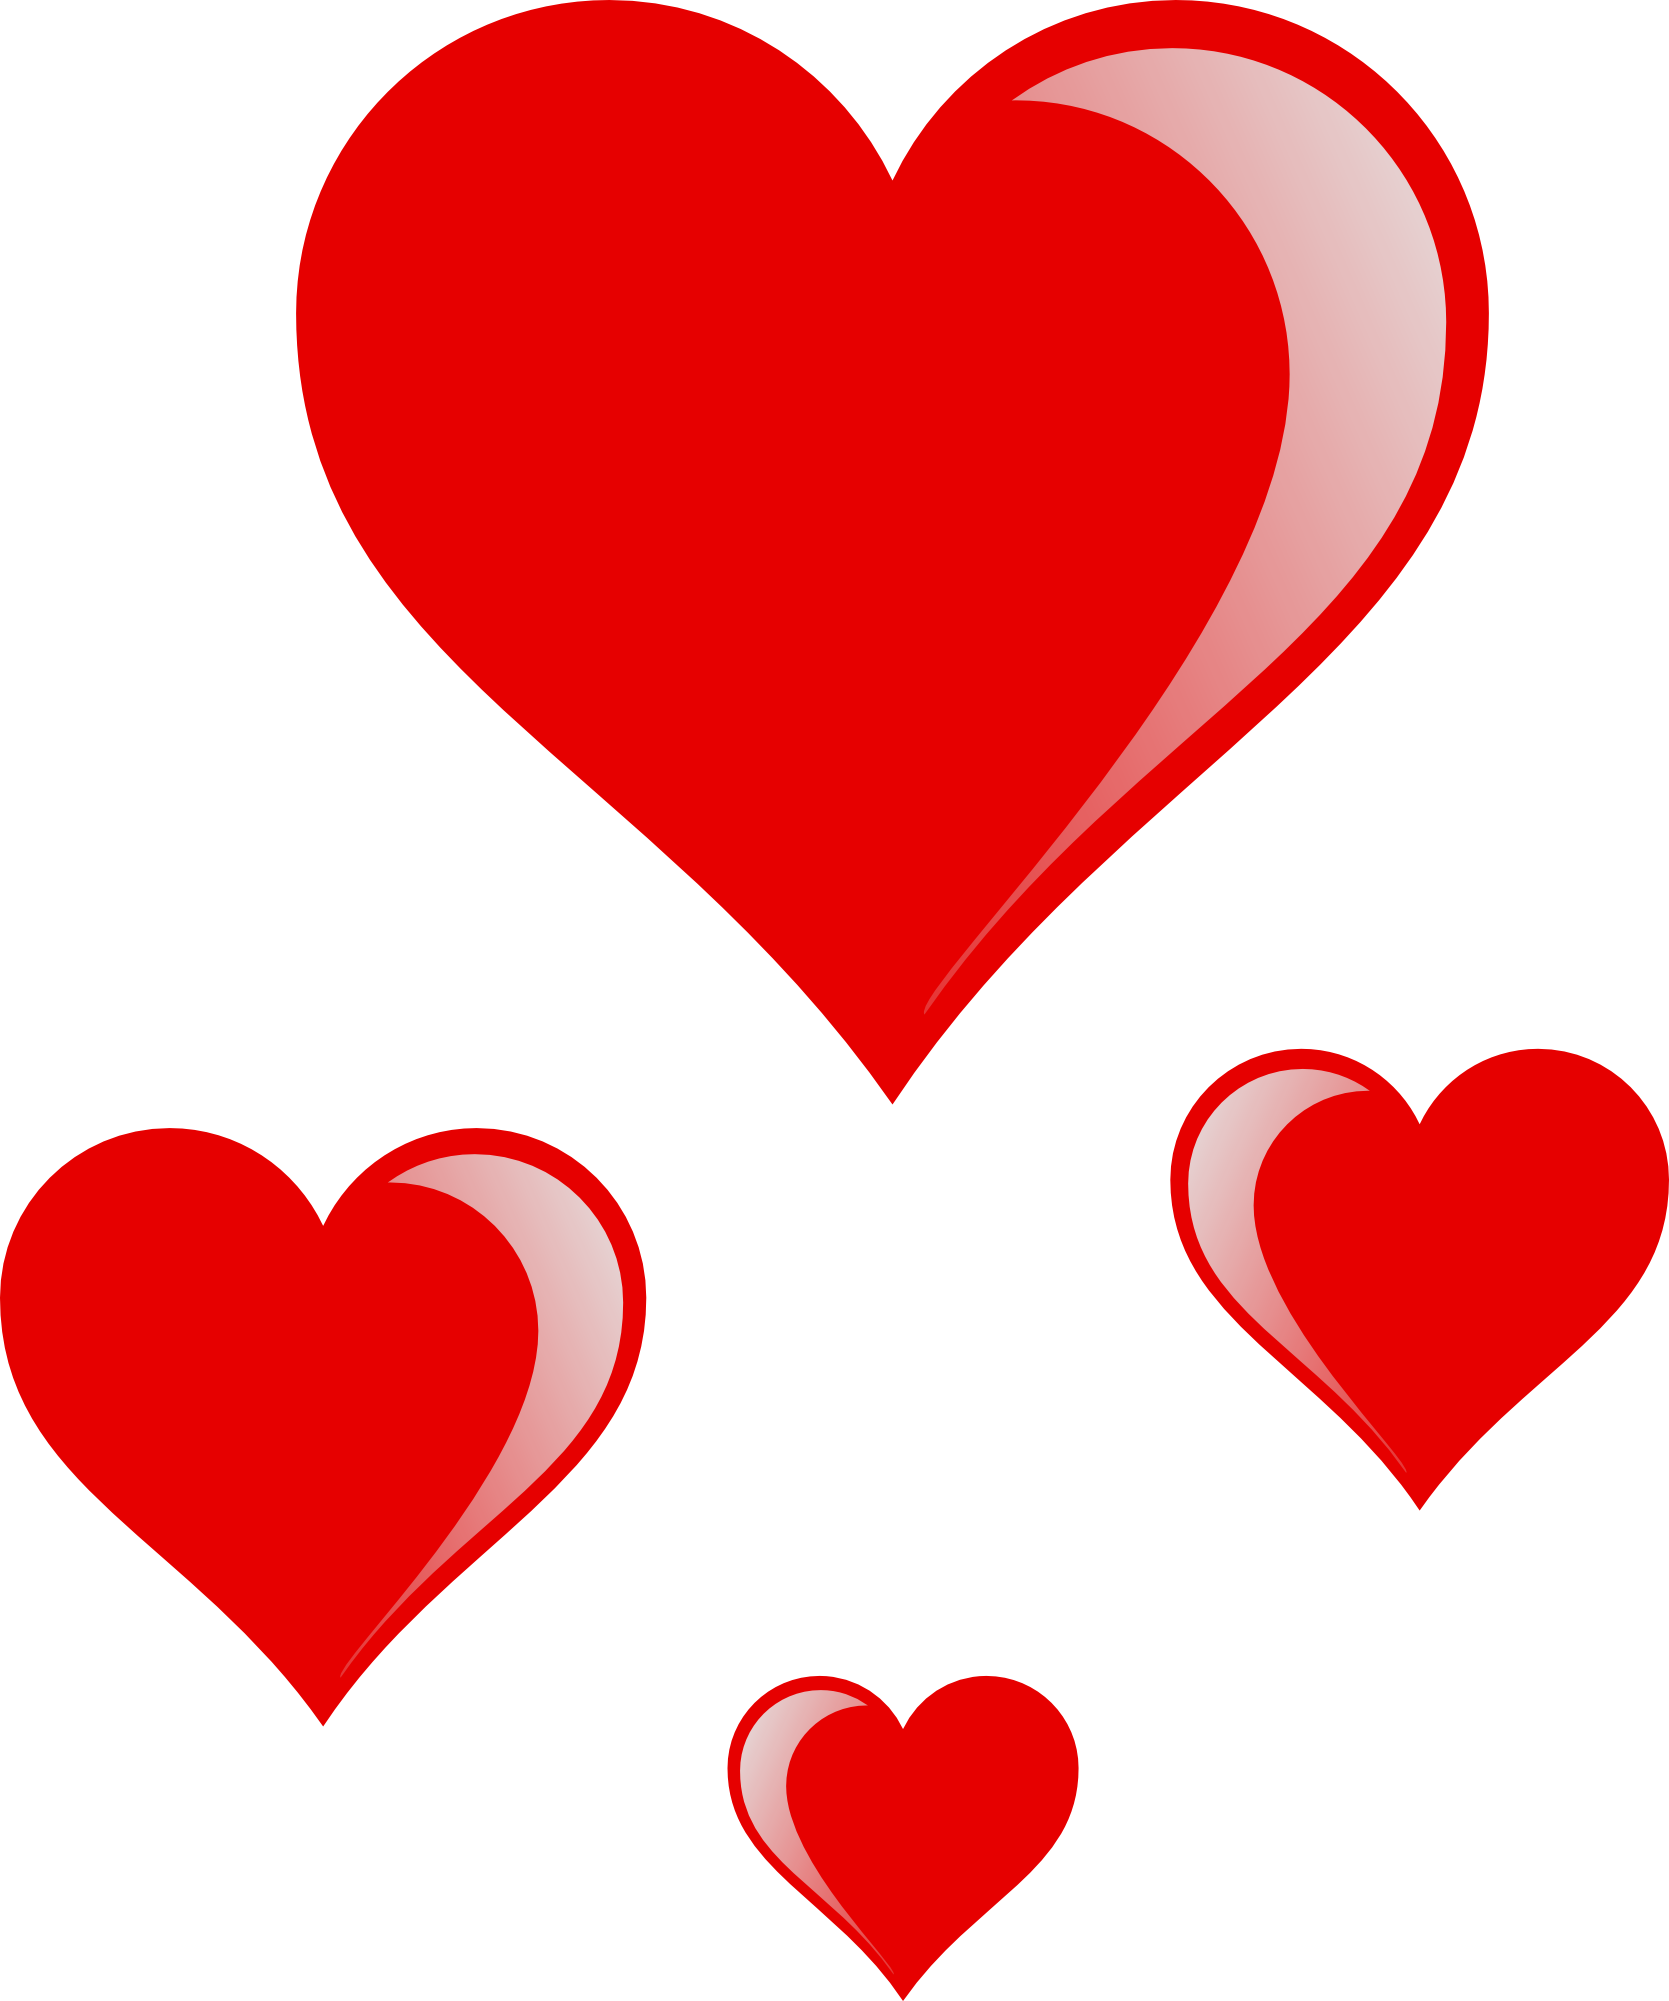 Valentine Heart Images Clip Art - Clipart library